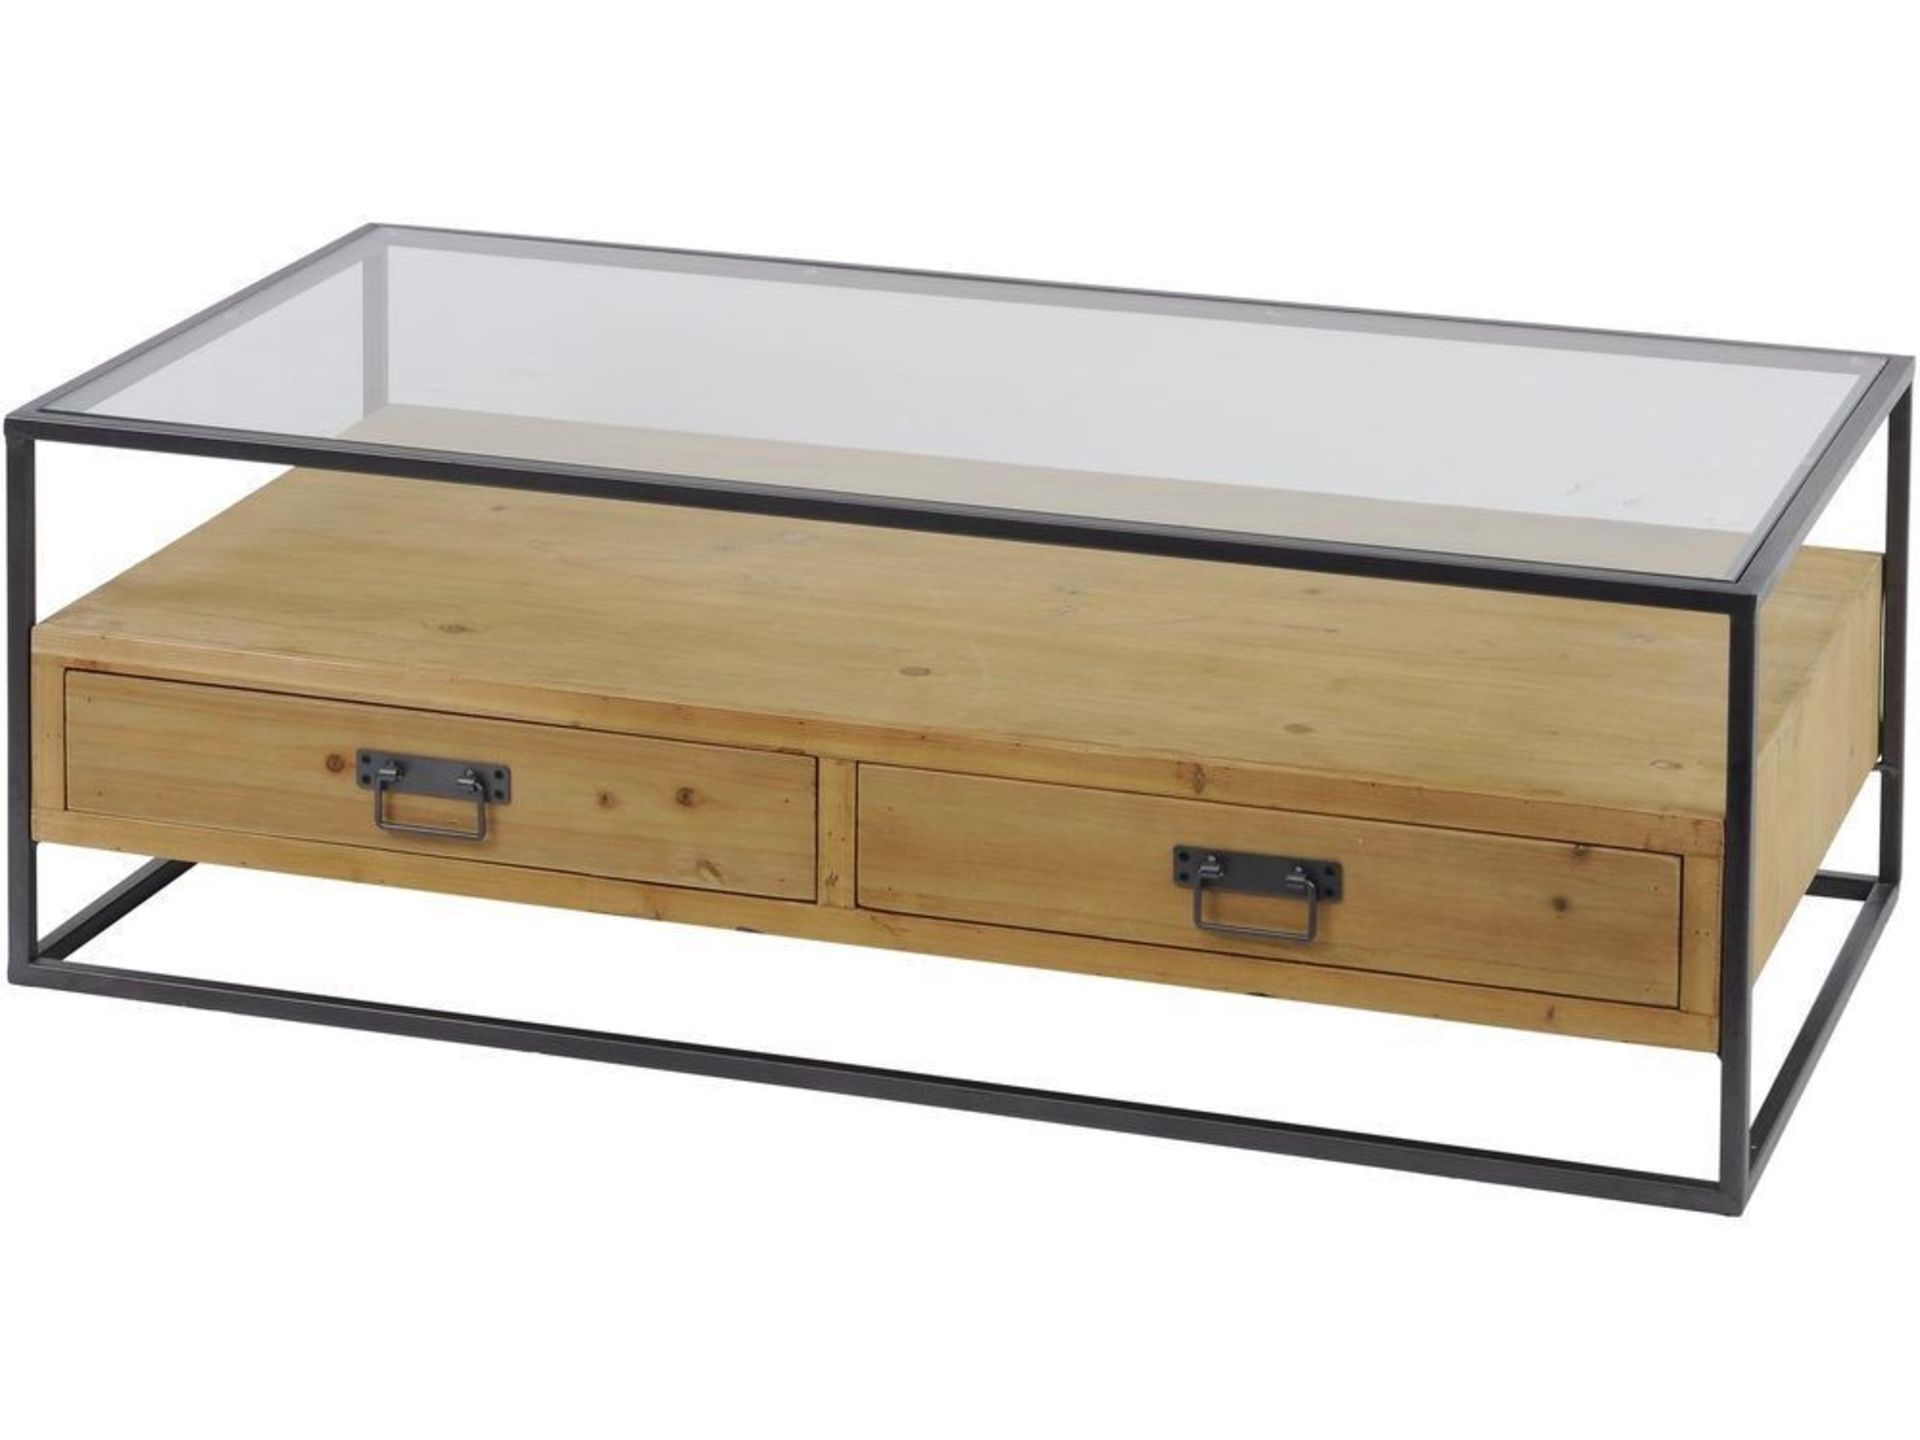 Kempsey Glass Top Wood Coffee Table With its simple, strong style, this industrial-inspired coffee